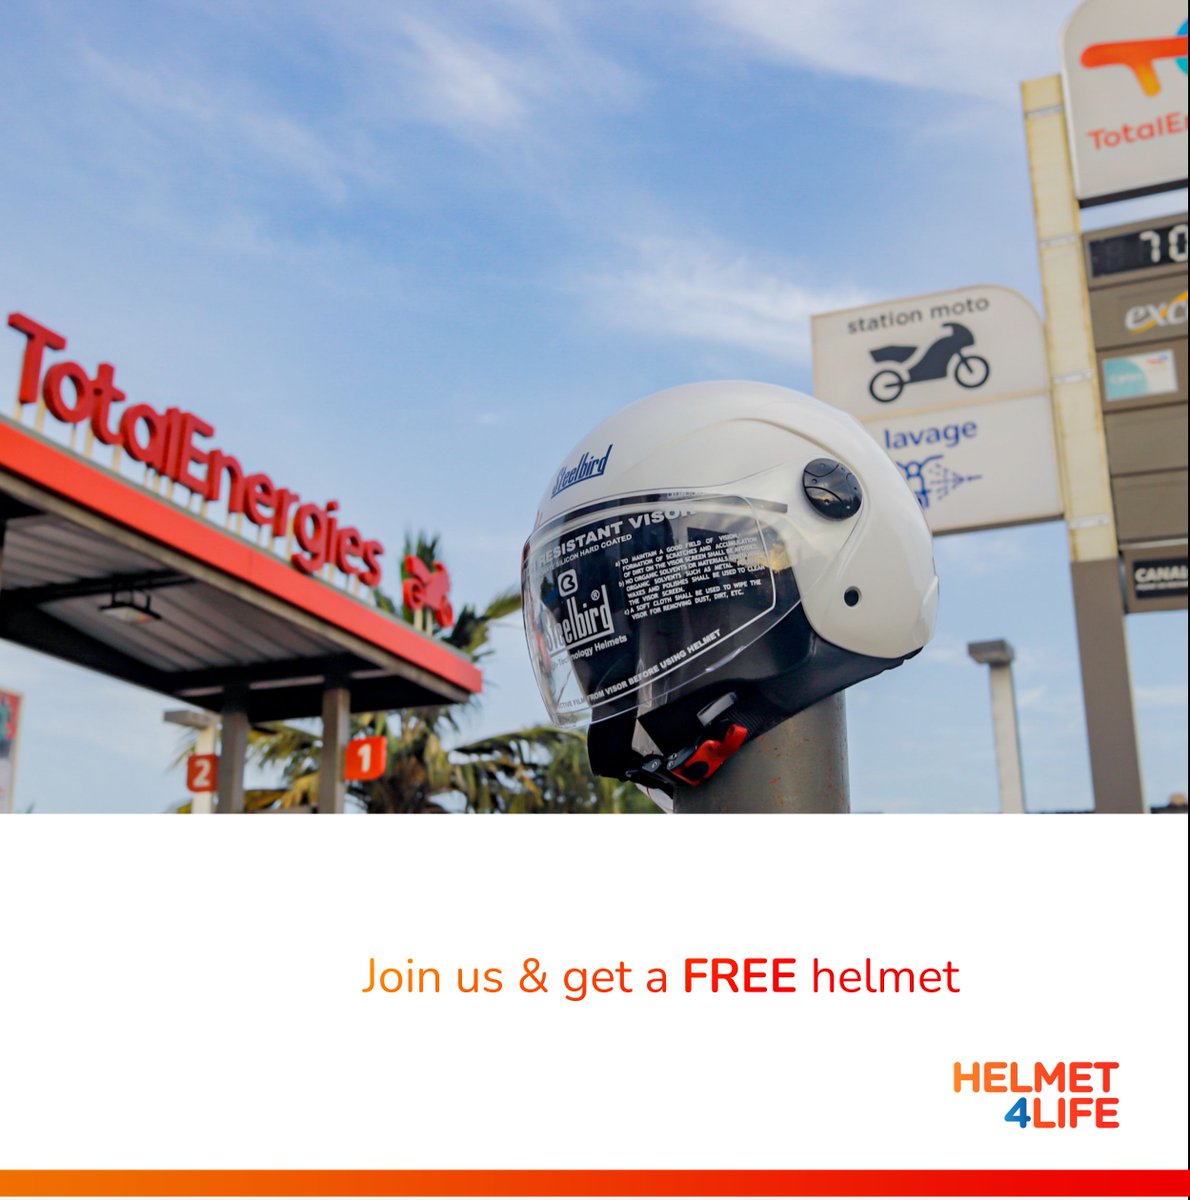 📣 Calling all bikers! Join us at our Helmet4Life road safety initiative at a TotalEnergies service station near you from May 14-17, 2024 & get a FREE helmet 🏍️ Register now at bit.ly/Helmet4Life. Don't ride alone - share with a fellow rider and join the crew! 👊